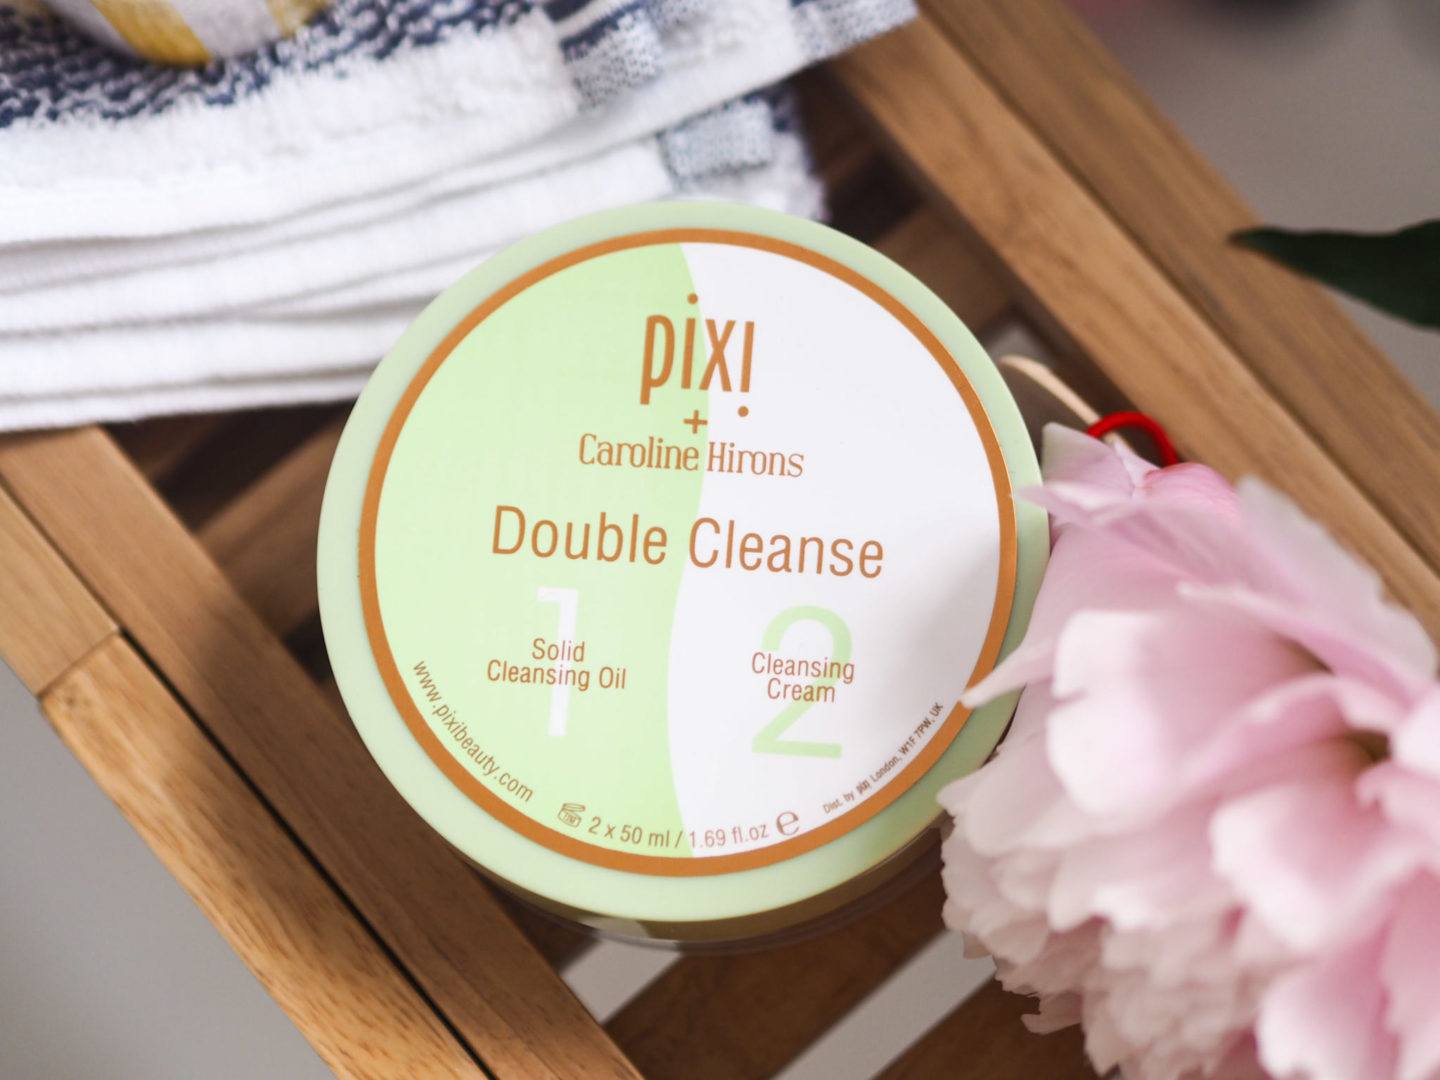 Pixi Double Cleanse review